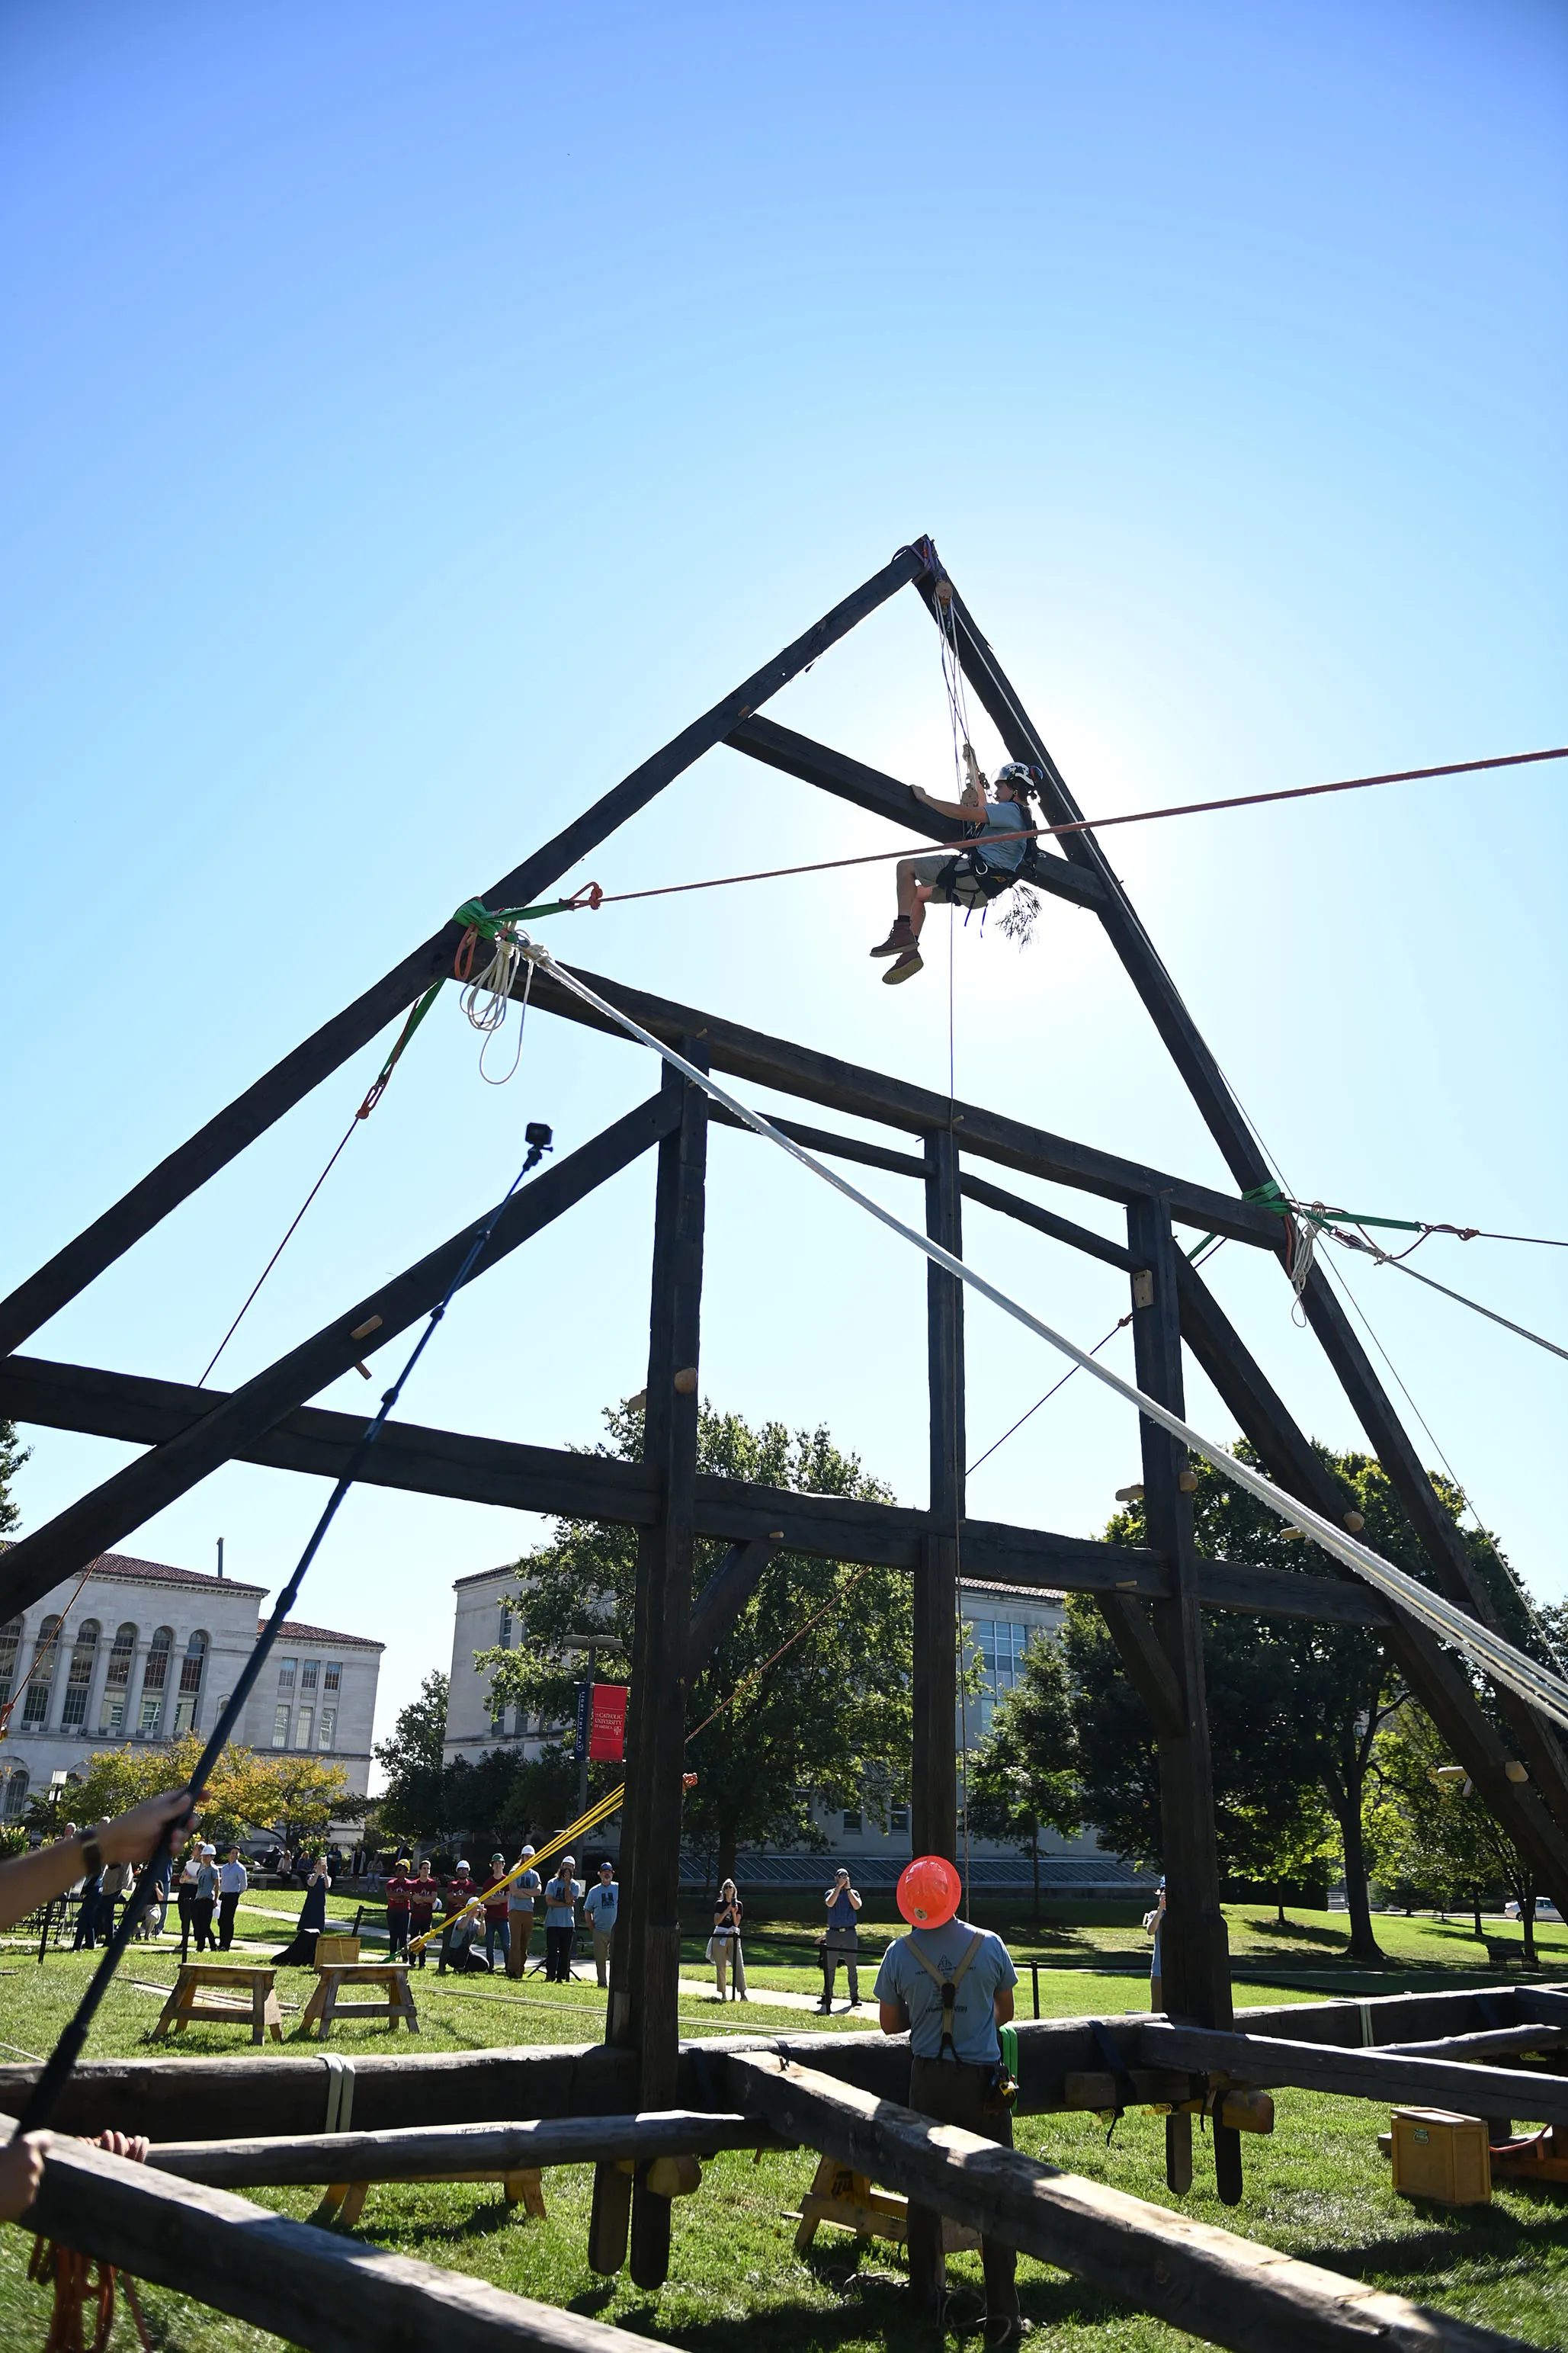 A builder scales the Notre-Dame de Paris truss replica to fix a whetting bush, or evergreen, to the top in celebration at the Catholic University of America in Washington, D.C., on Sept. 26, 2022. Patrick G. Ryan